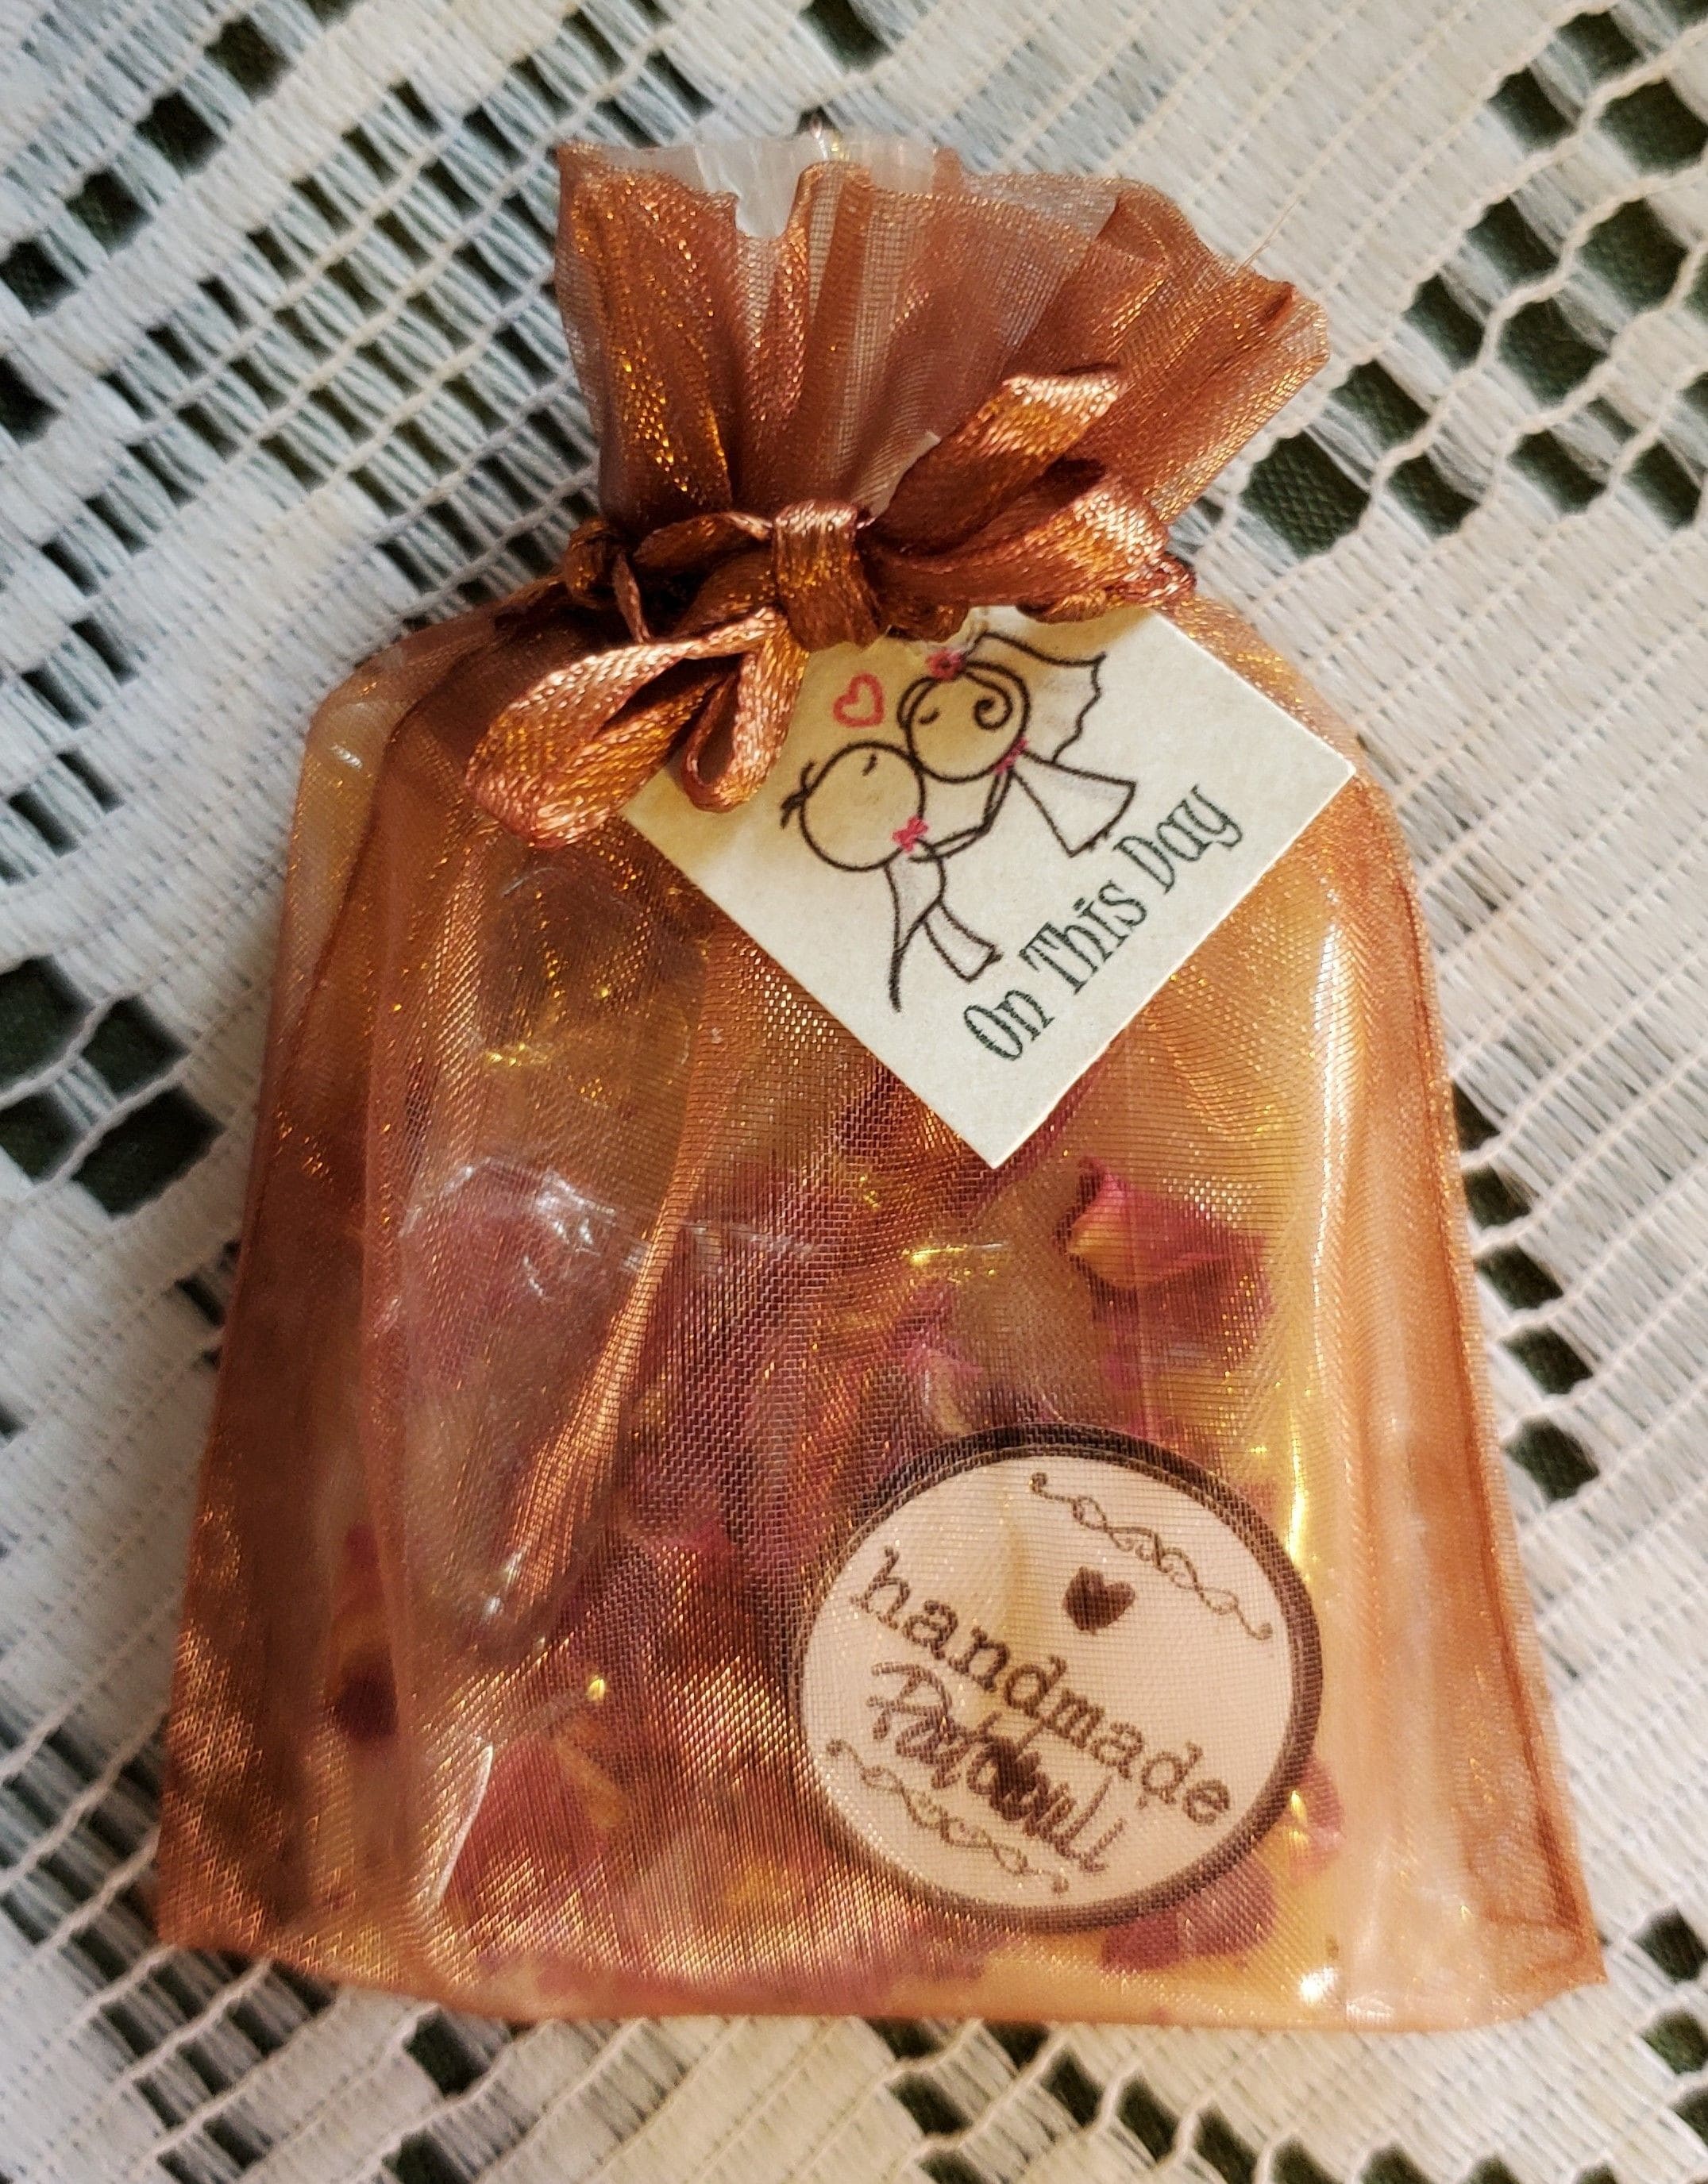 We make lovely soap gifts.  They are inexpensive, attractive, unique and handmade;  great quality ingredients, an item that you will be pleased to gift.